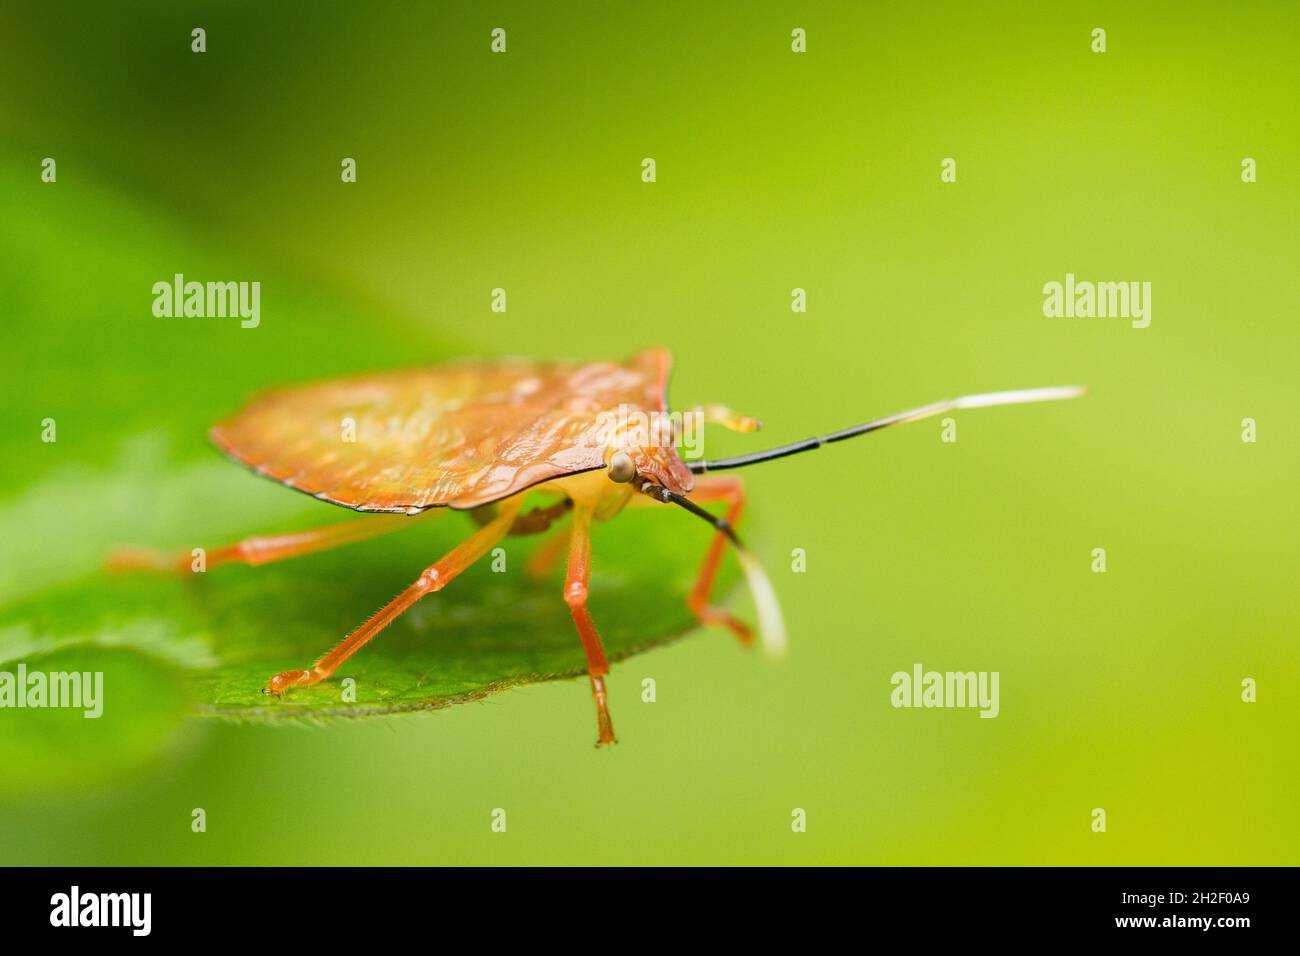 An orange heteroptera (insect) perched on a leaf in Puerto Viejo de Sarapiqui in Costa Rica Stock Photo